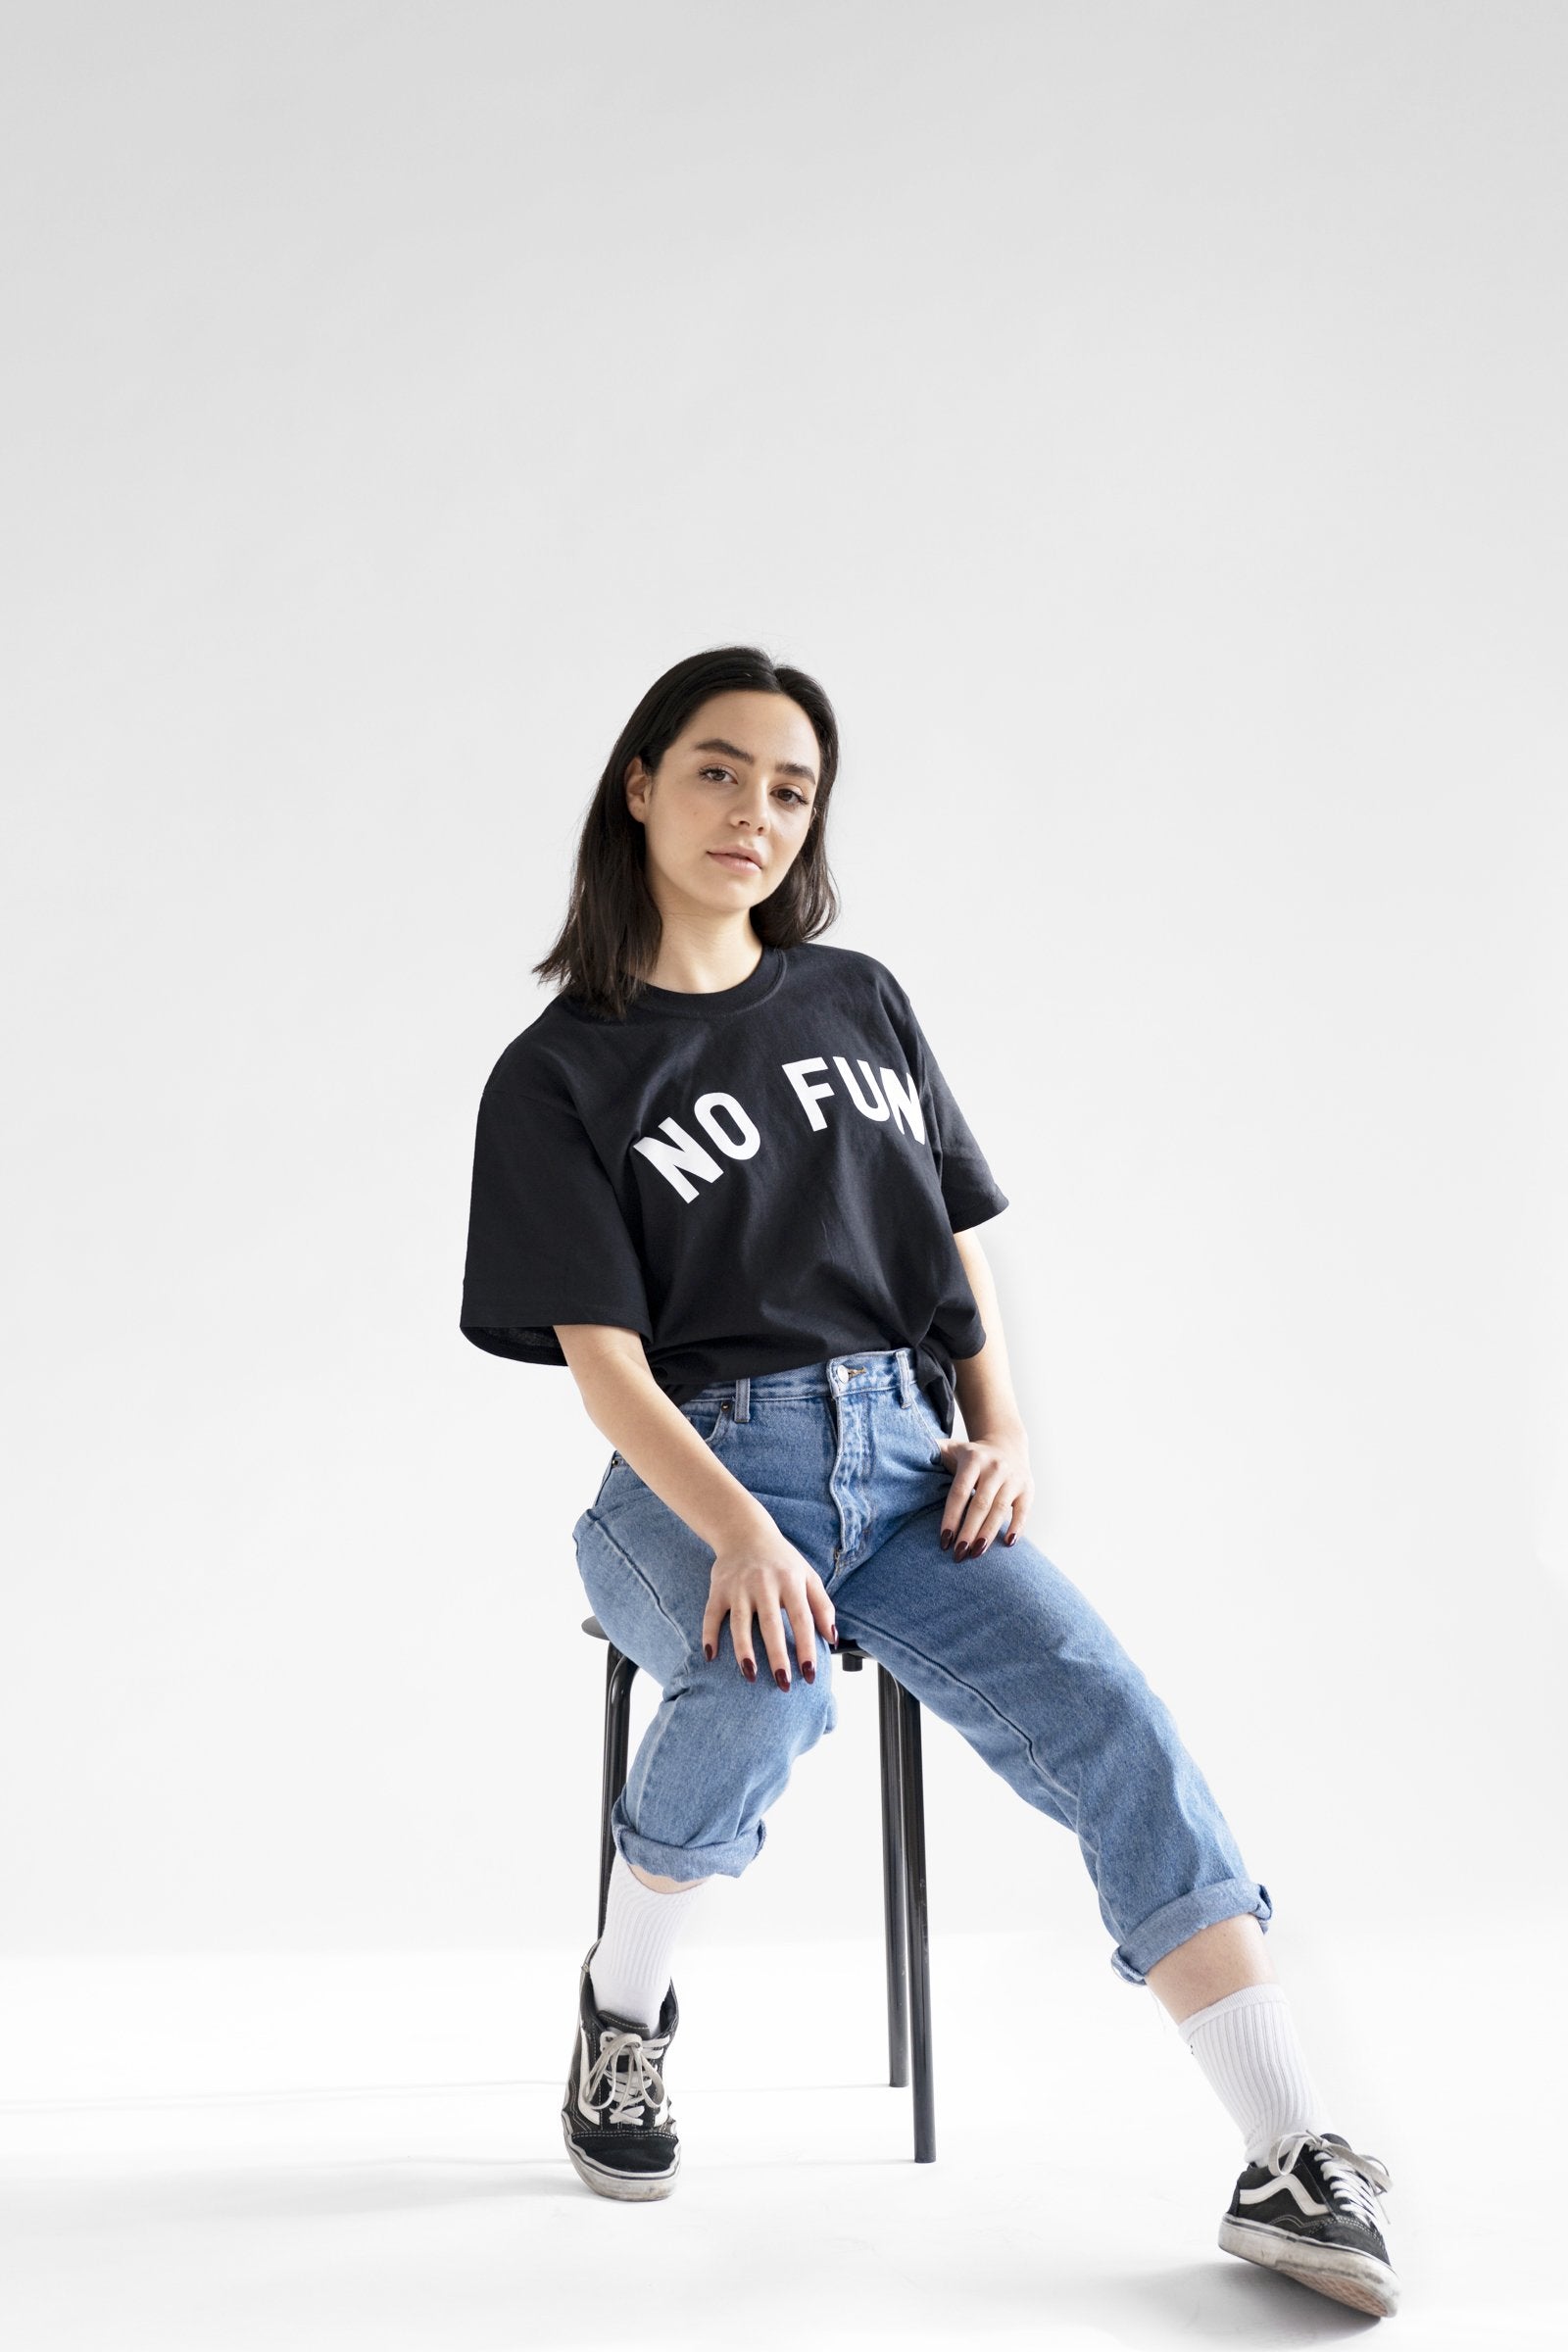 "No Fun®" T-shirt being worn by a female model.  She is also wearing blue jeans, white socks, and black shoes.  She is seated in front of a white background.